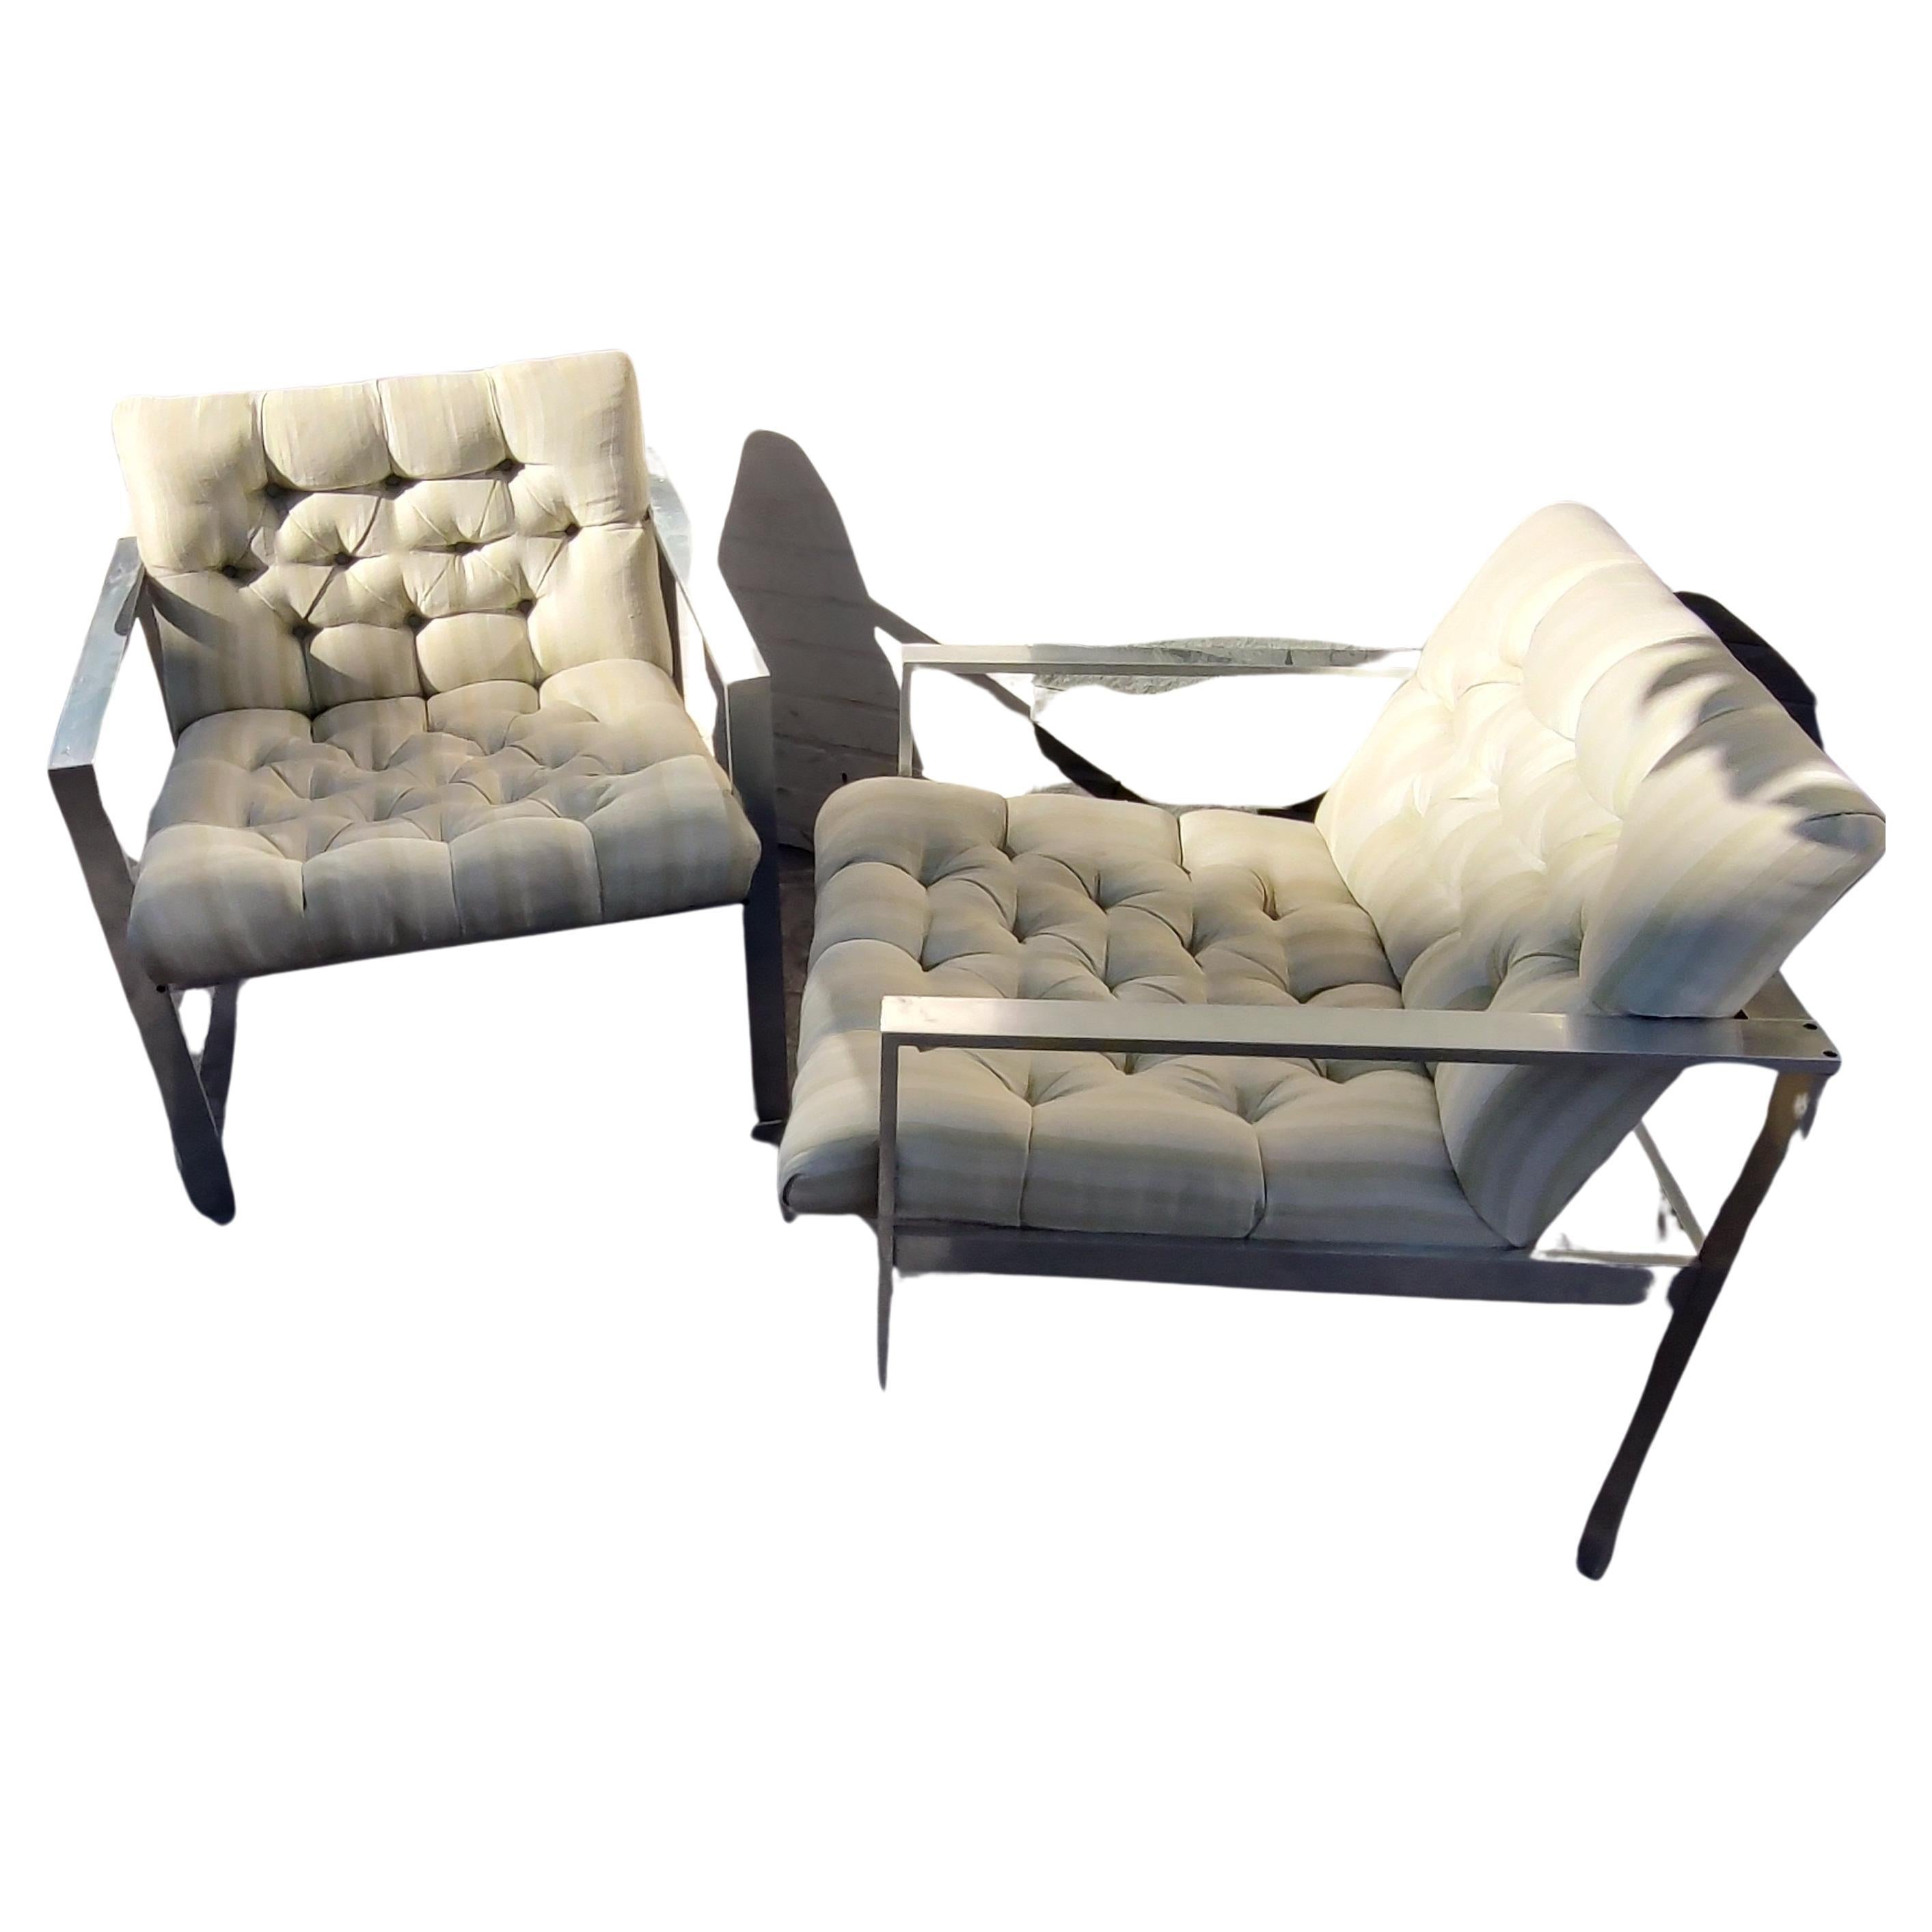 Pair of Mid-Century Modern Tufted Aluminum Lounge Chairs by Harvey Probber For Sale 4